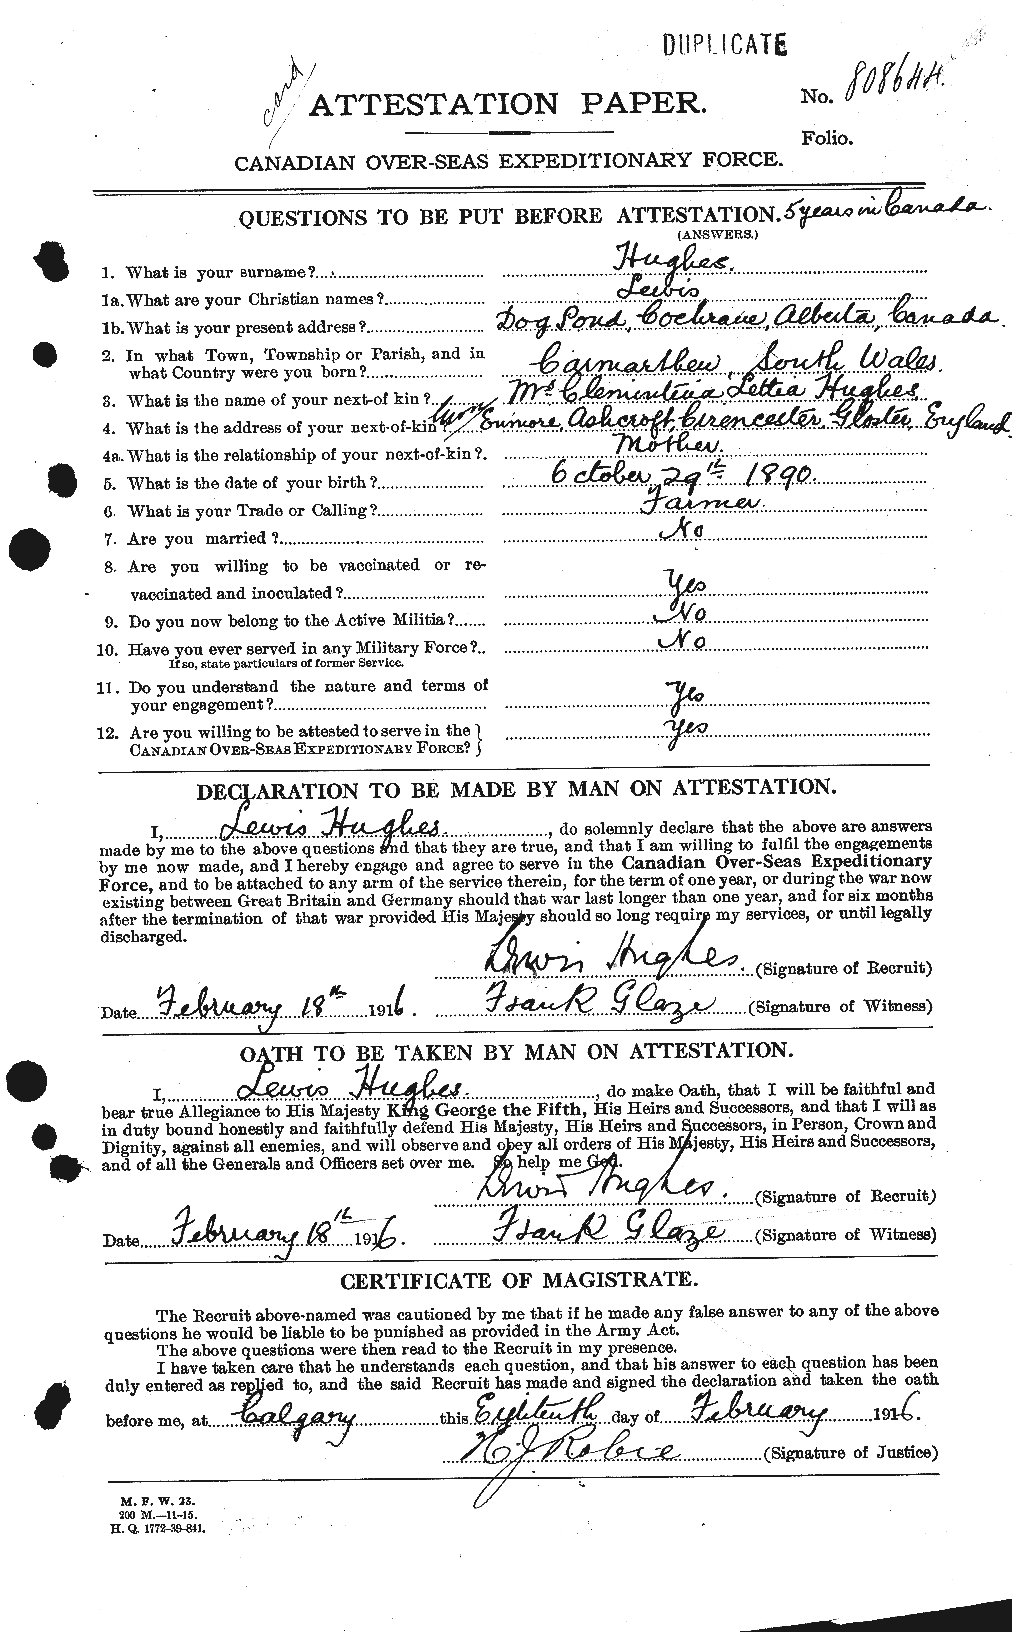 Personnel Records of the First World War - CEF 404106a